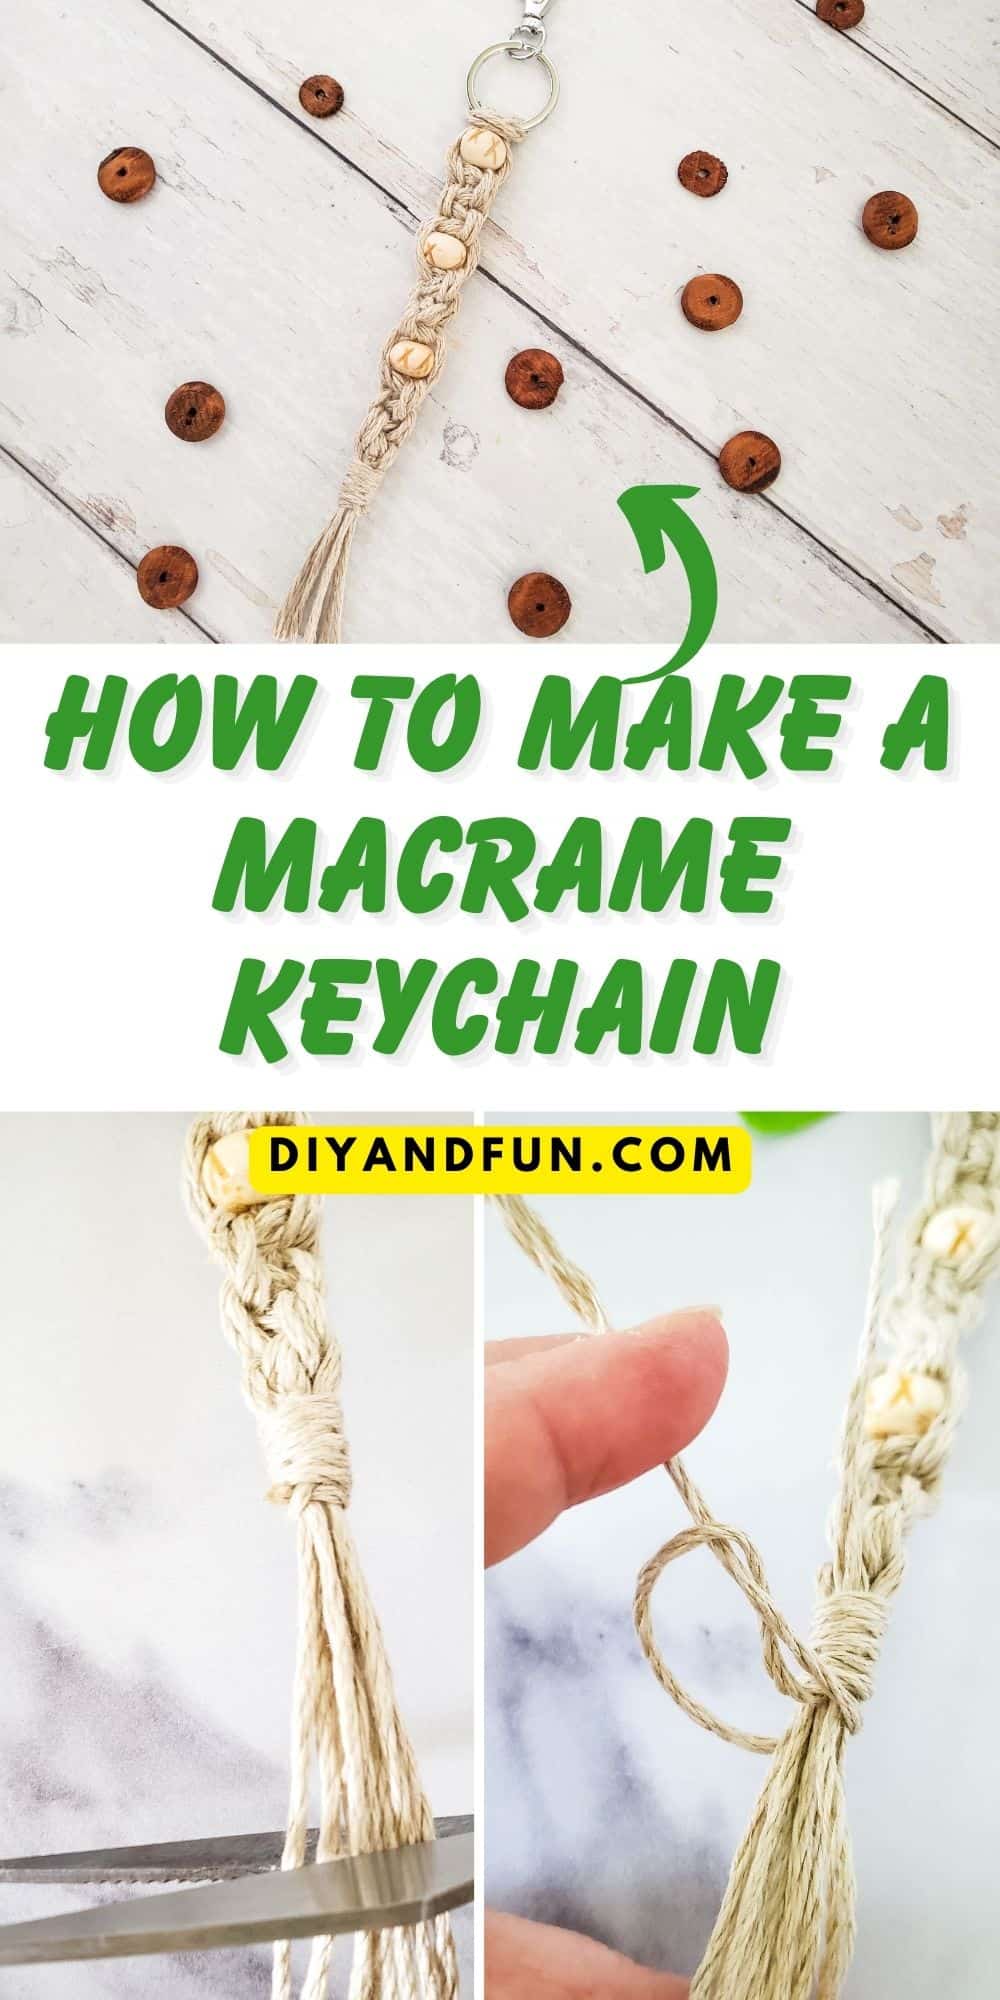 ow to Make a Macrame Keychain, a simple diy craft project idea for most ages featuring   knotted cord that can be done in about 30 minutes.